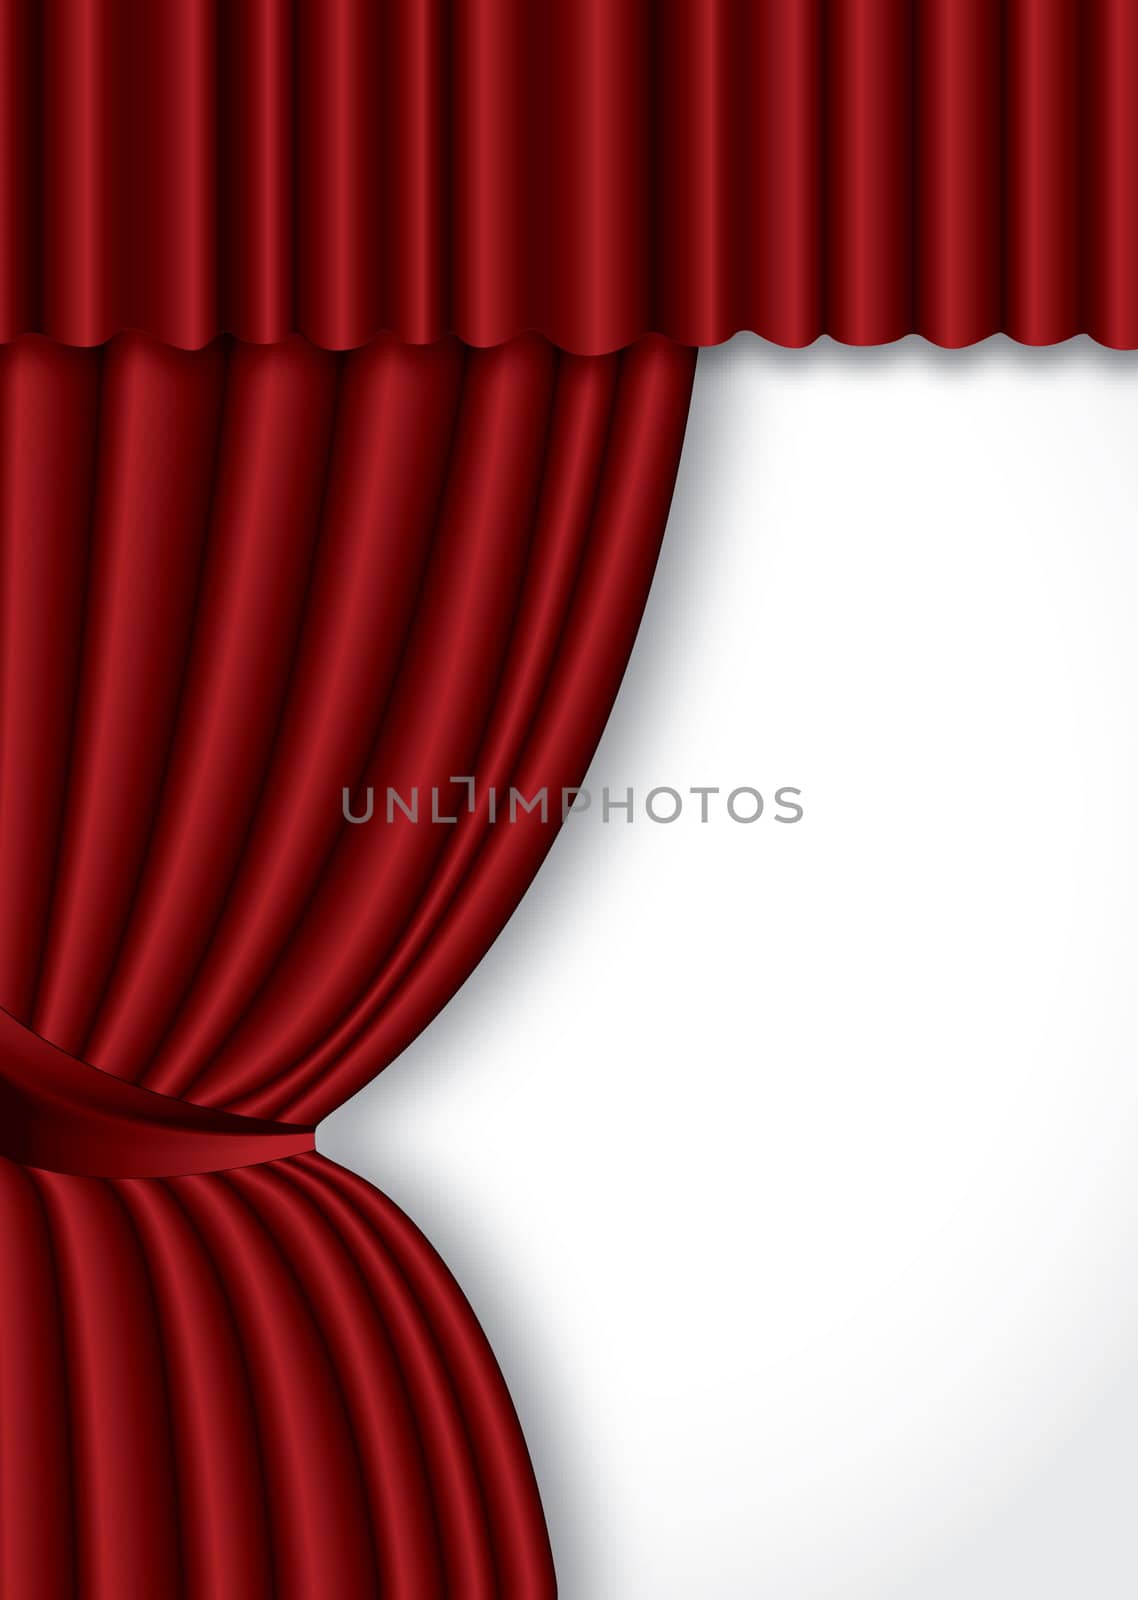 Red theater silk curtain background with wave, by svtrotof